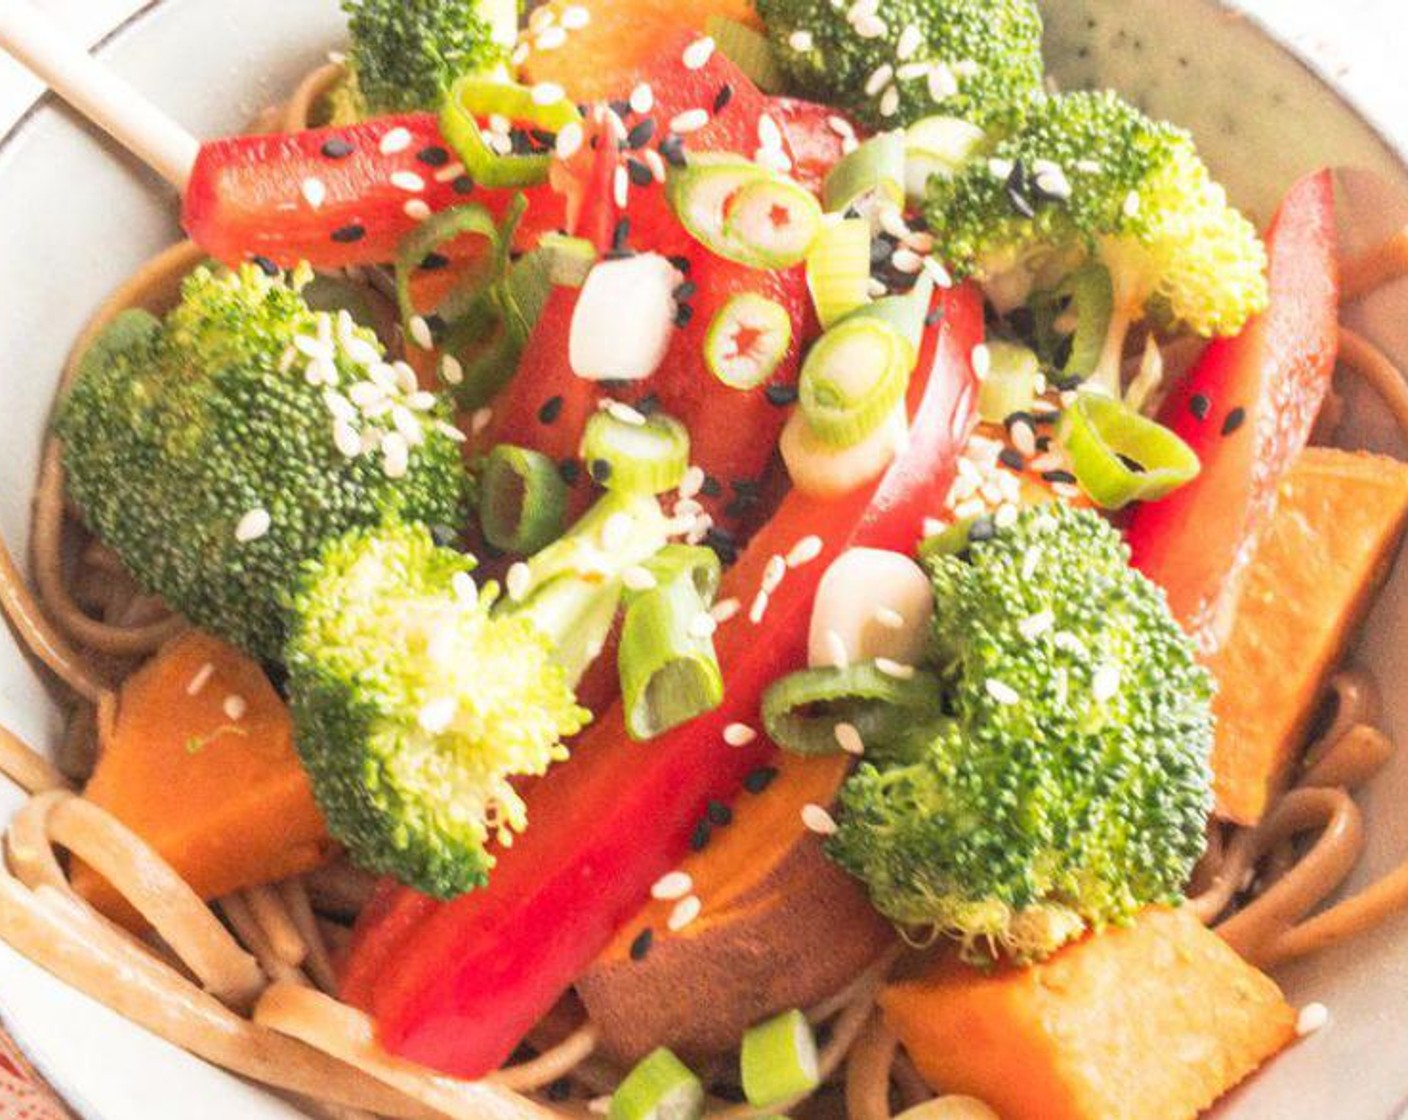 step 5 Pile noodles in a bowl with veggies on top. Add Scallions (3 stalks) and Roasted Sesame Seeds (to taste) and enjoy!